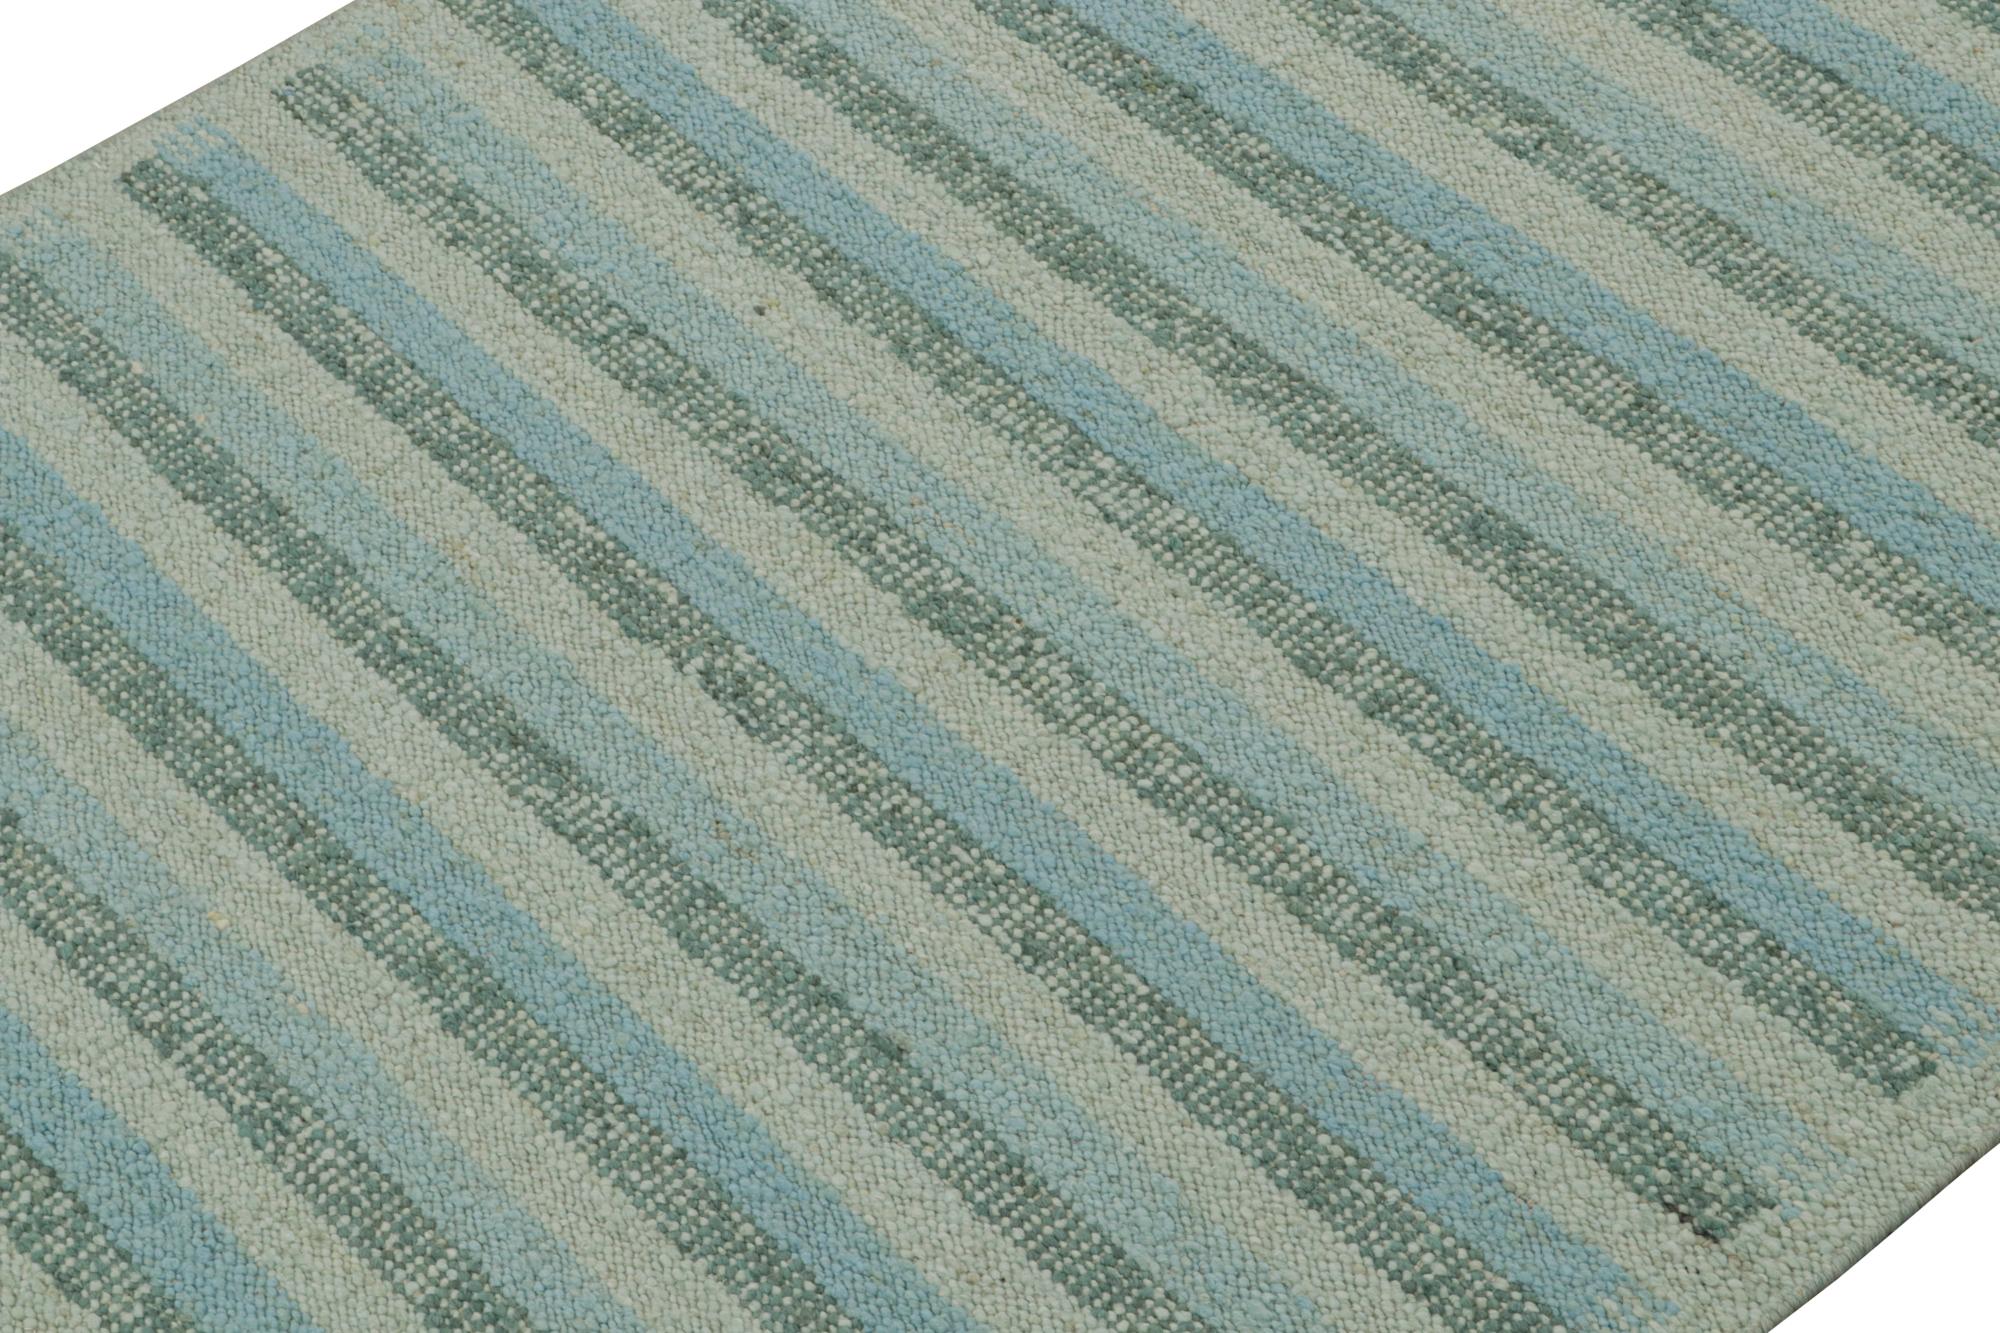 This 6x9 Swedish style kilim is from the inventive “Nu” texture in Rug & Kilim’s award-winning Scandinavian flat weave collection. Handwoven in wool.

Further On the Design:

This rug enjoys a boucle-like texture of blended yarns, and a look